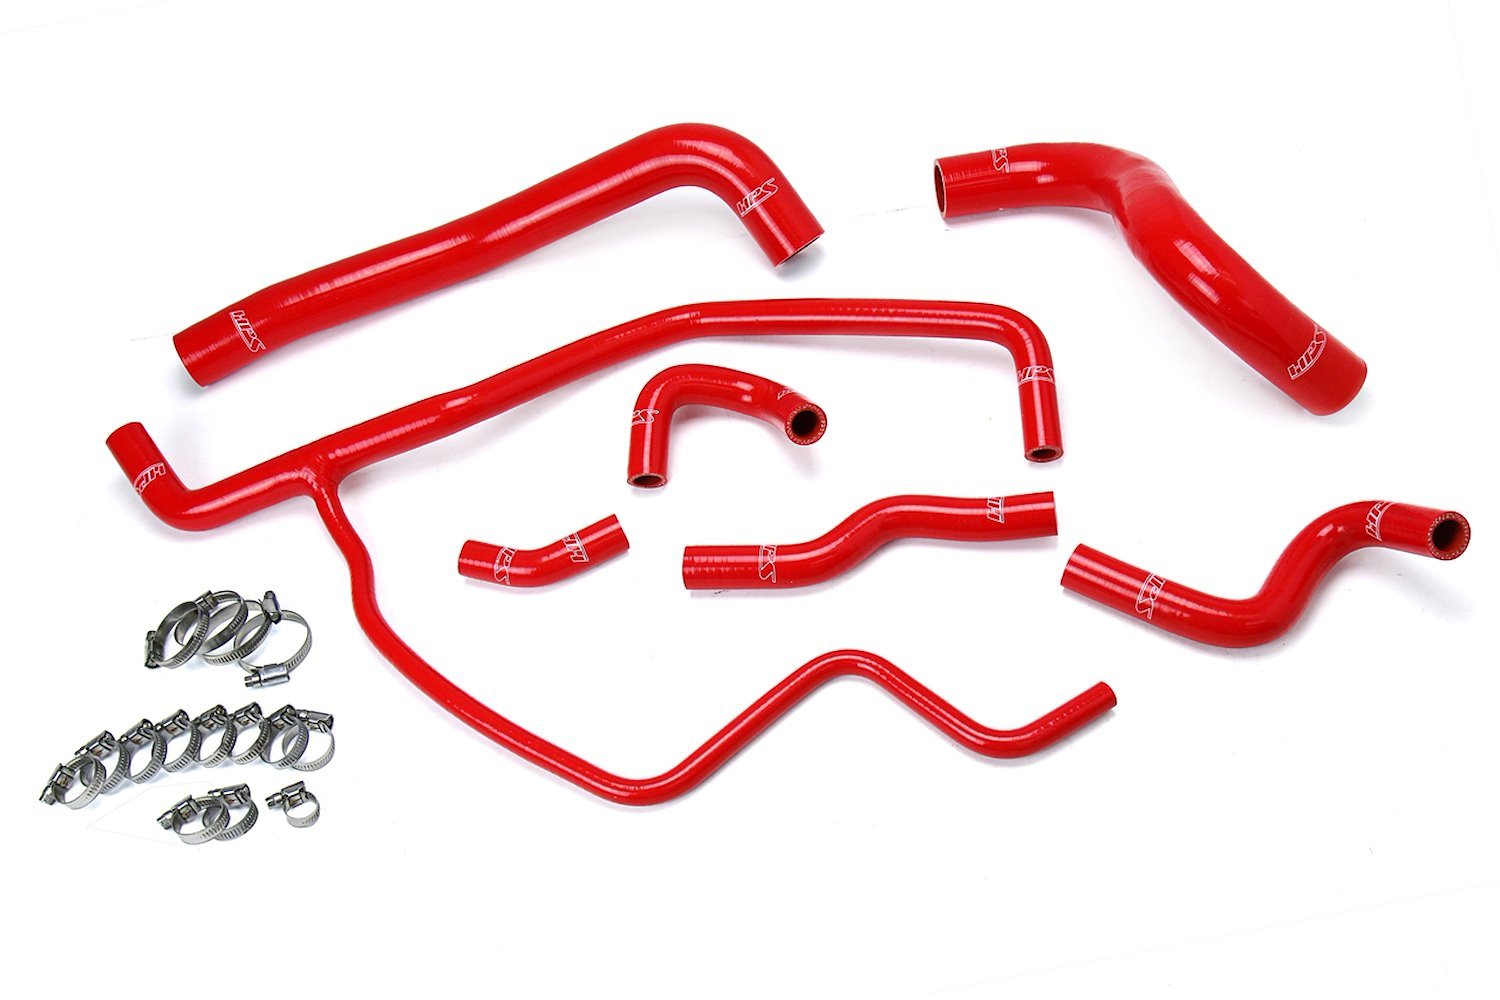 57-1583-RED Coolant Hose Kit, High-Temp 3-Ply Reinforced Silicone, Replace Rubber Radiator Heater Coolant Hoses